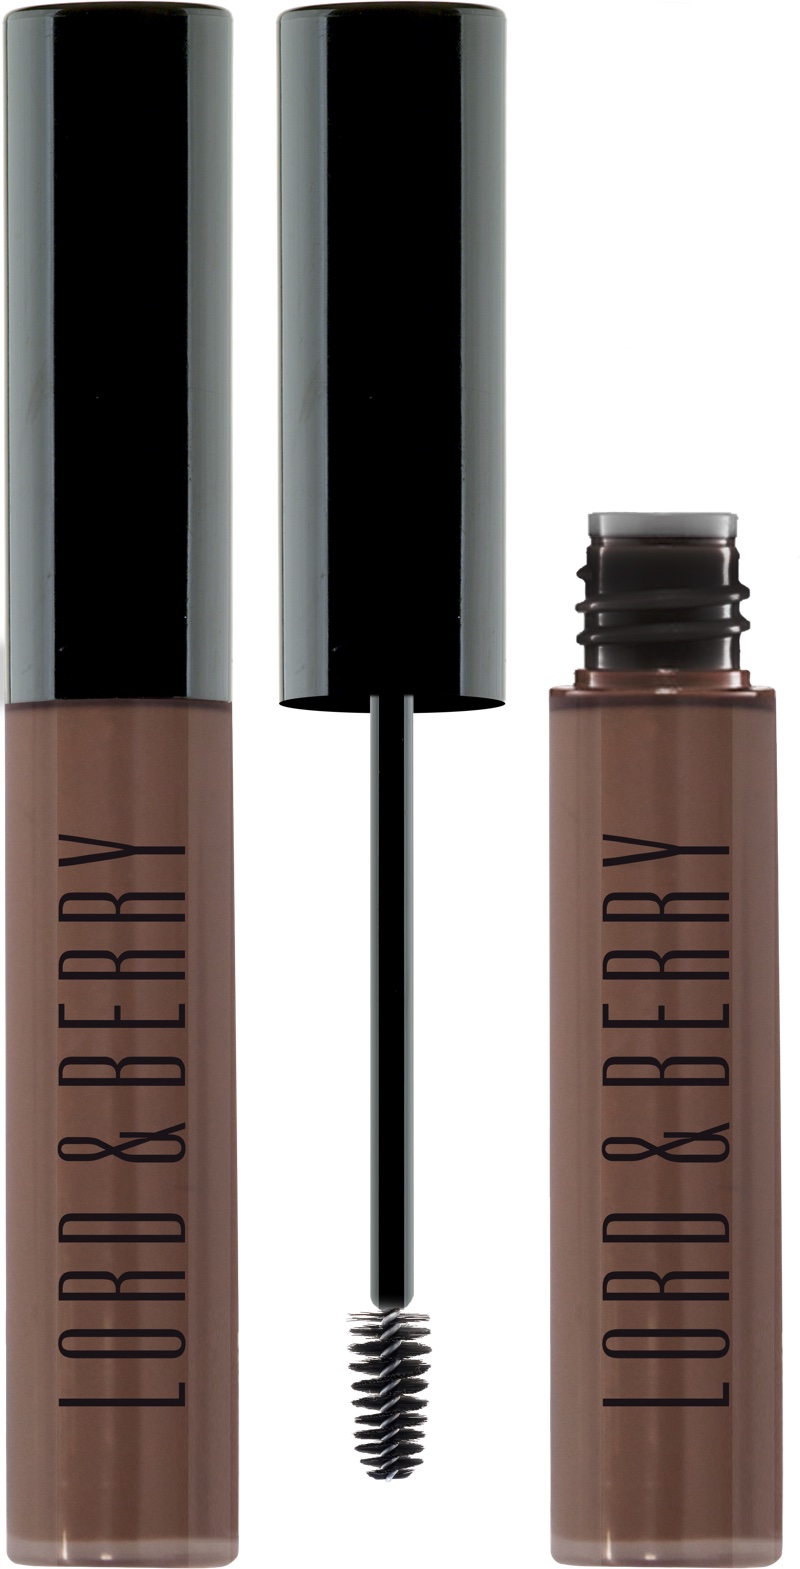 Lord & Berry launches Must Have brow mascara